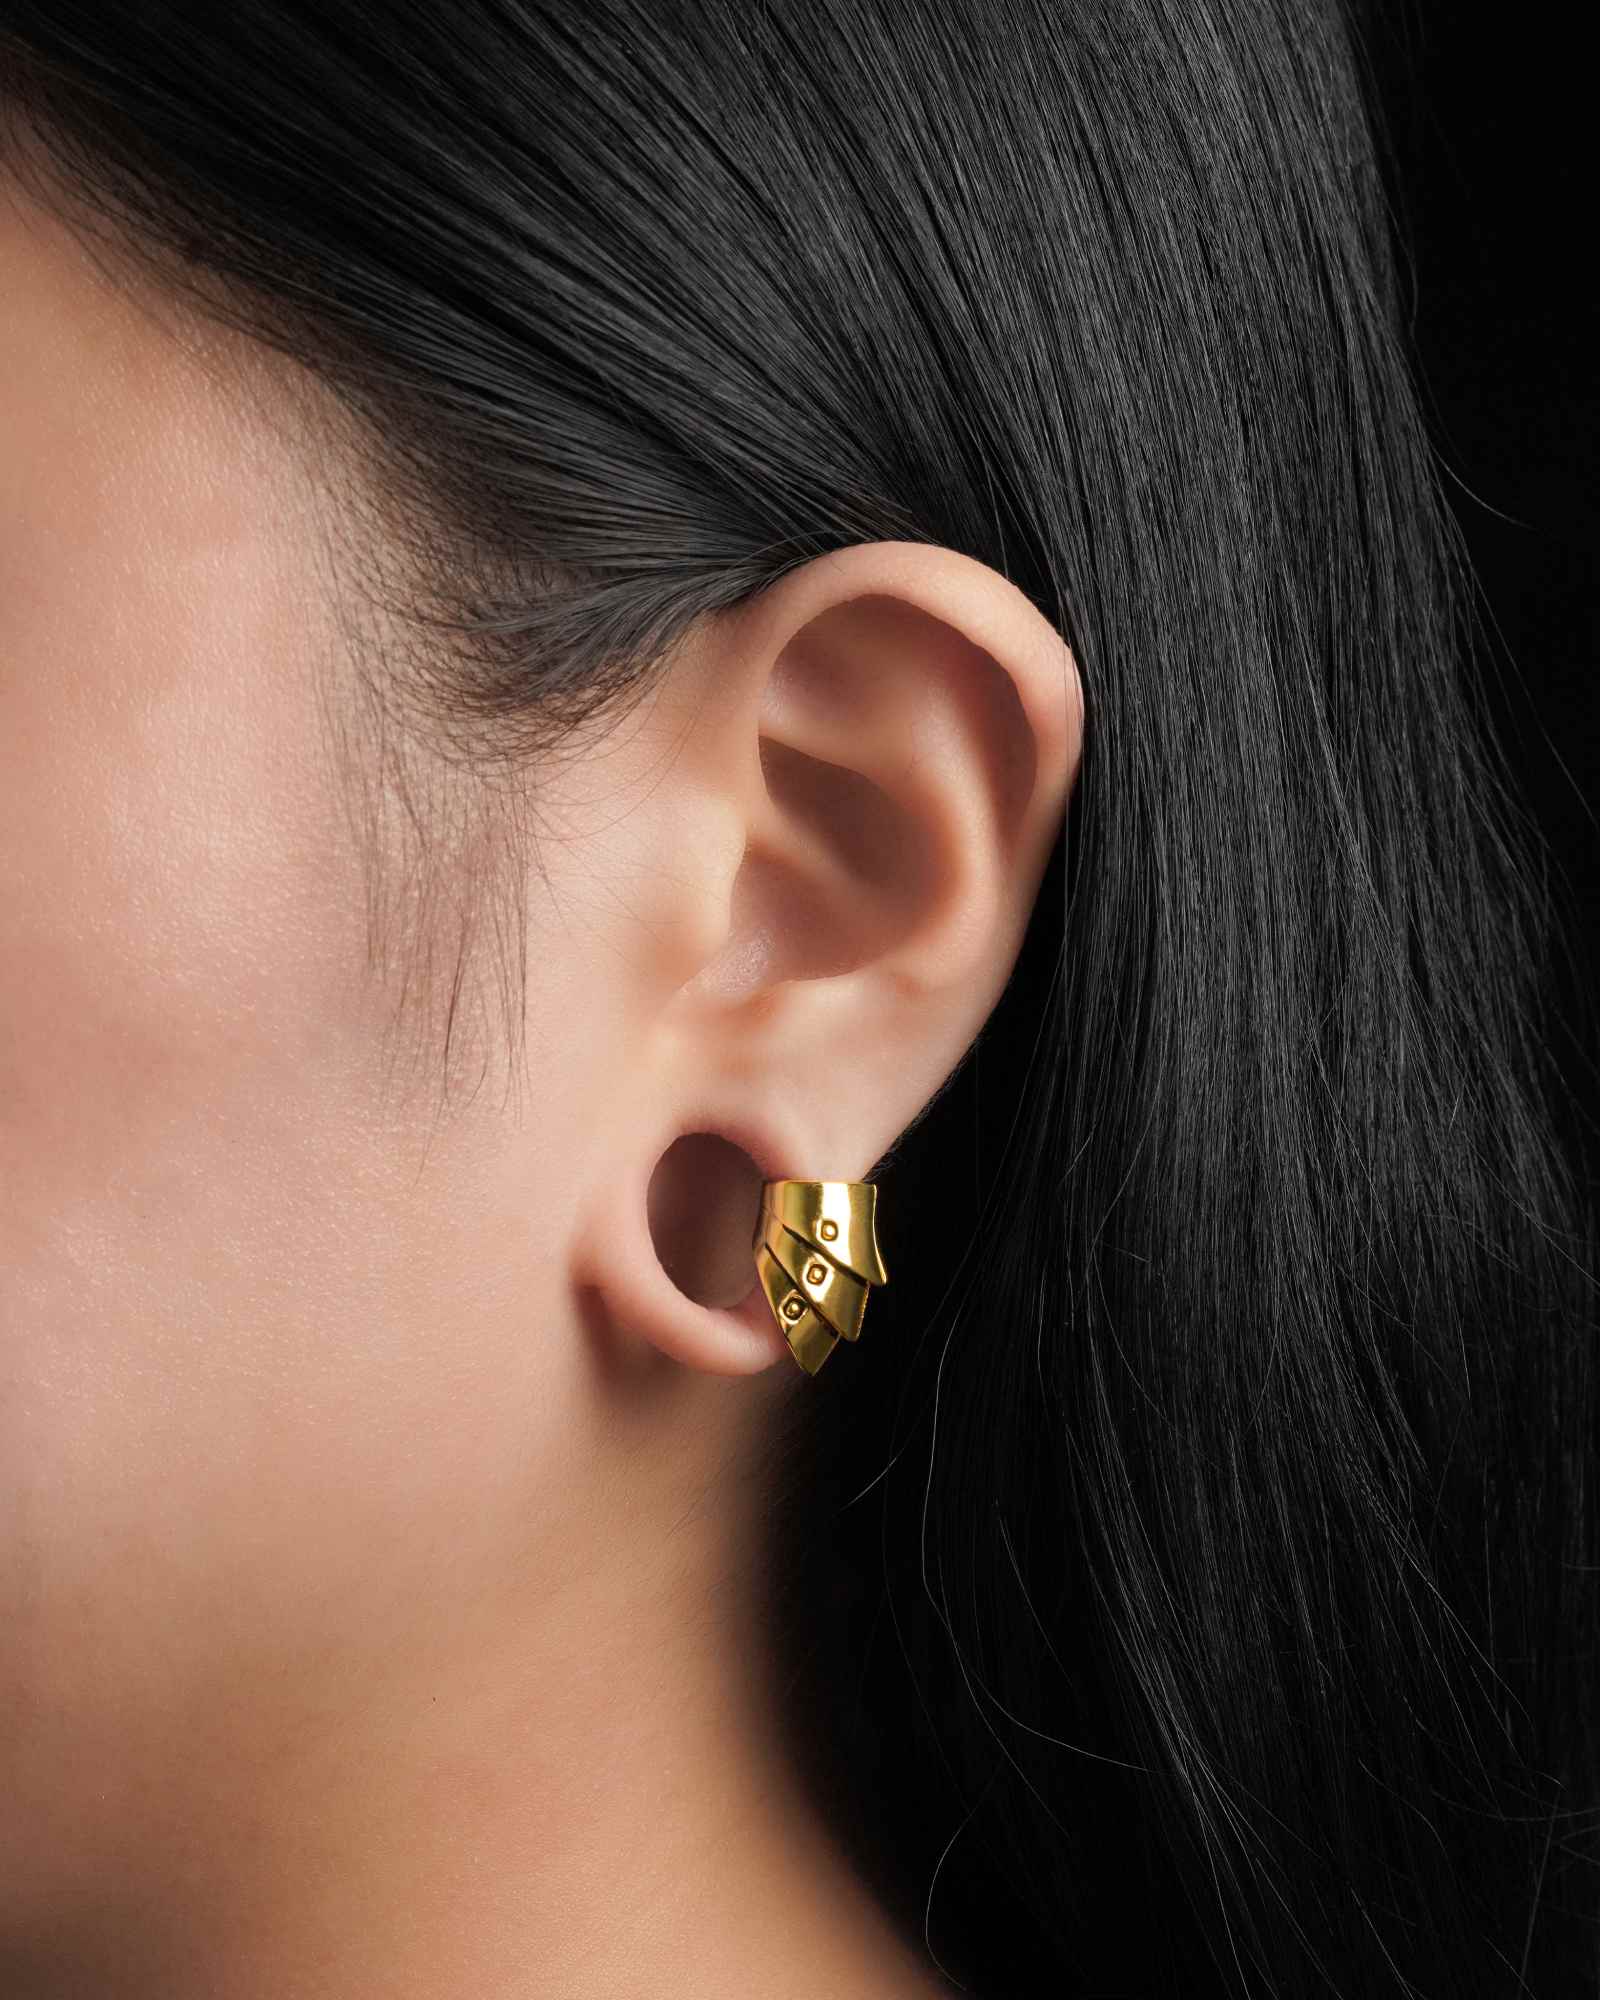 ARMOUR LOBE CUFFS™ | Stretched Ear Jewelry – Ask and Embla